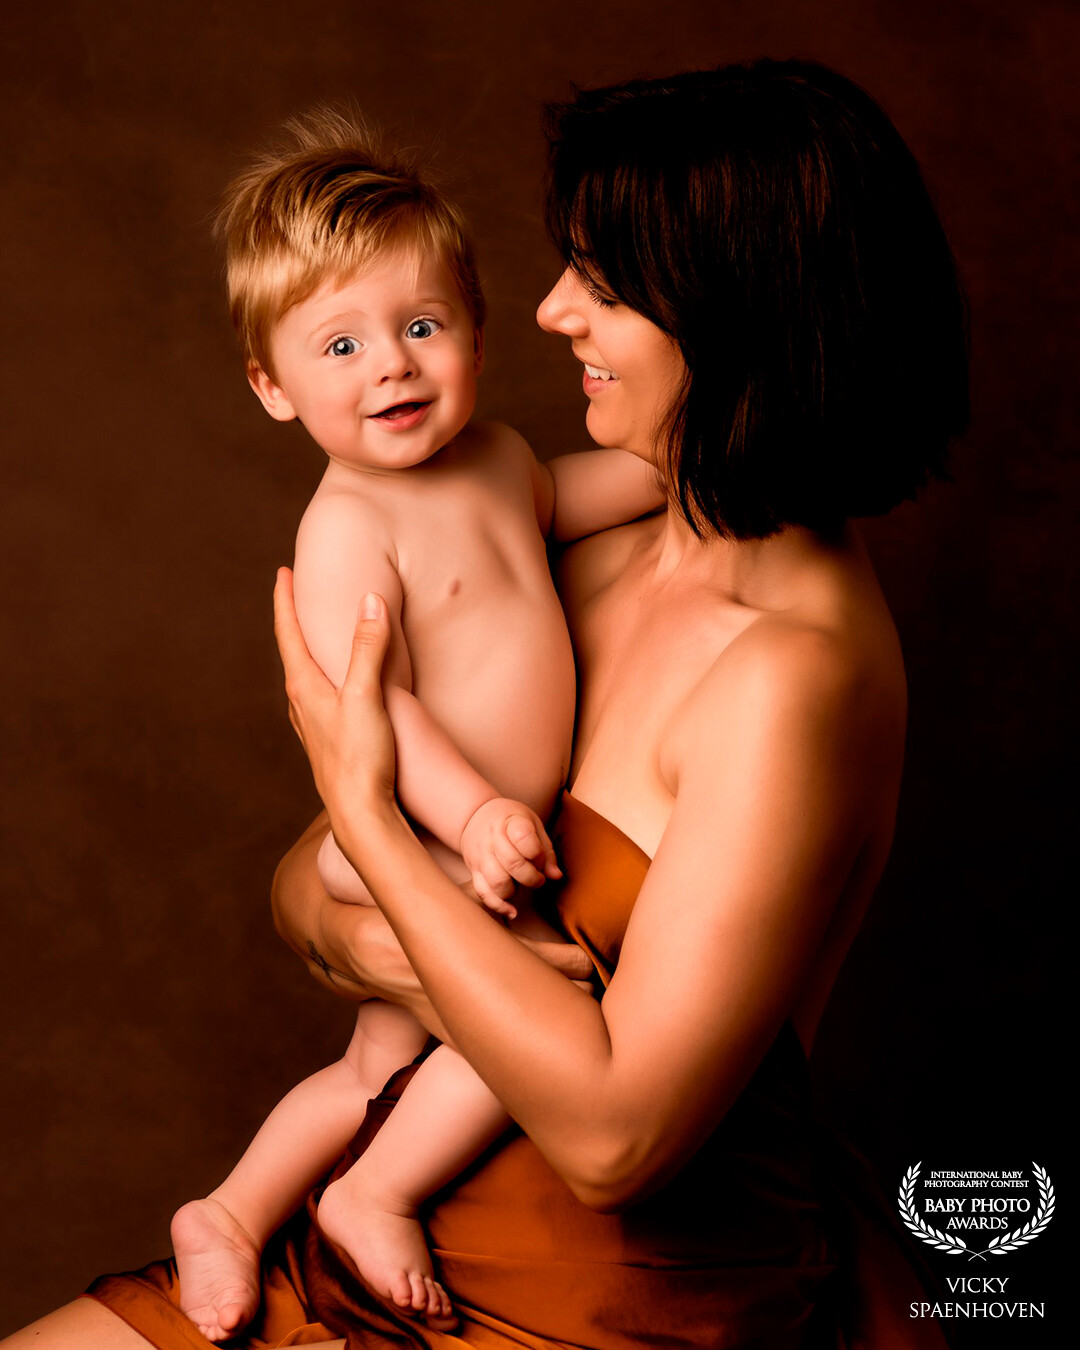 The images of this Mommy & Me shoot are all so beautiful. Mom and son have such a beautiful connection. This image is so pure.